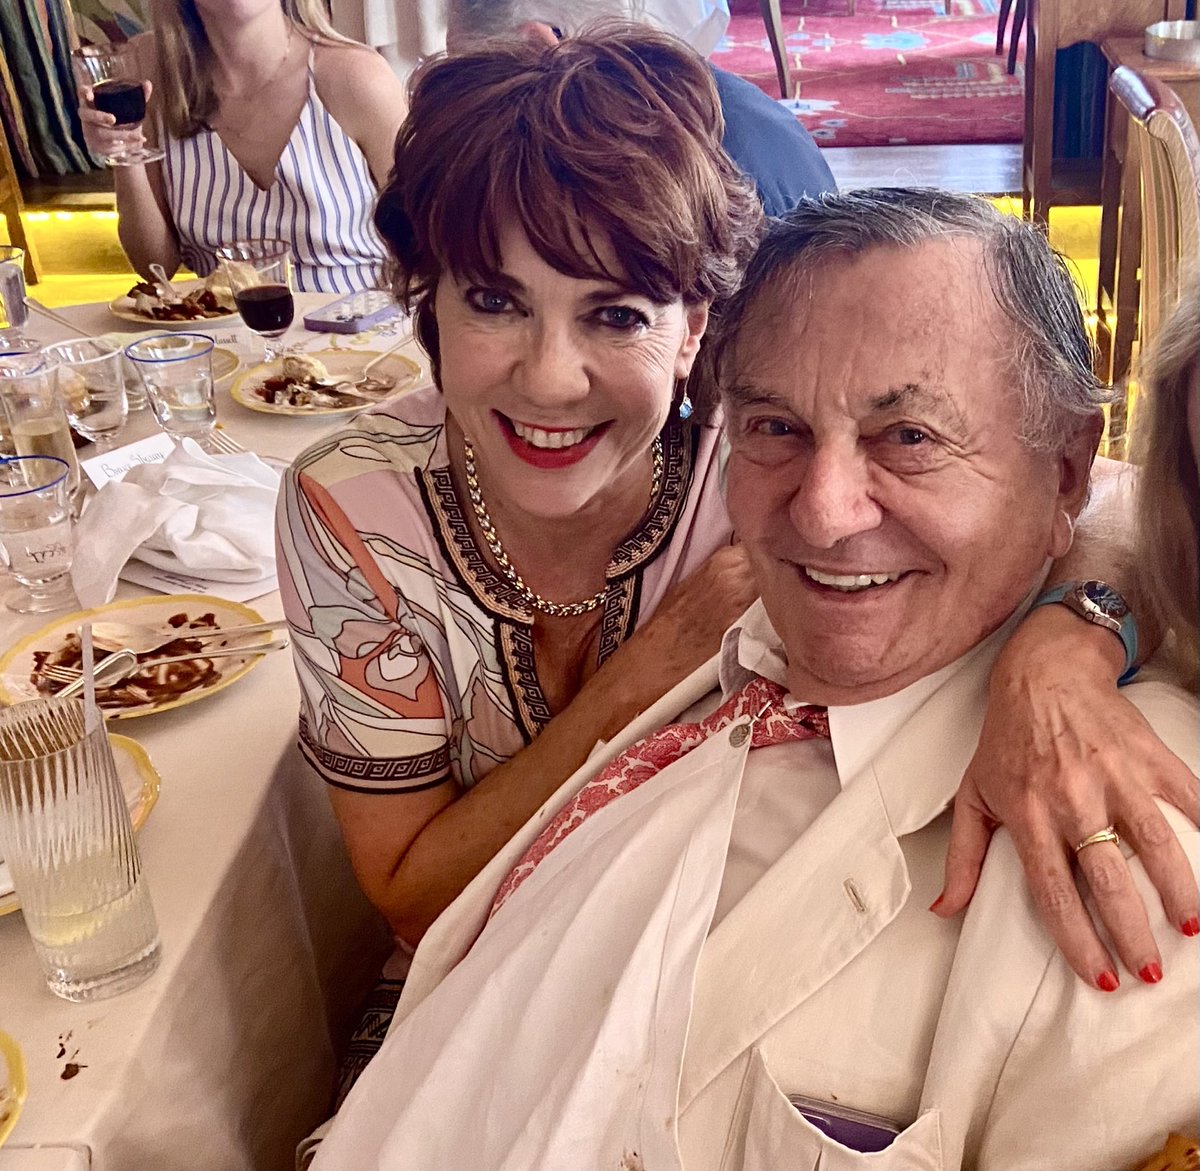 Celebrating the end of Barry Humphries’ hilarious one man show tour. Dame Edna’s manager’s comic timing is impeccable. “Let’s do lunch, Kathy. We can talk about all the people who aren’t there…” (big pause) “…And why.”